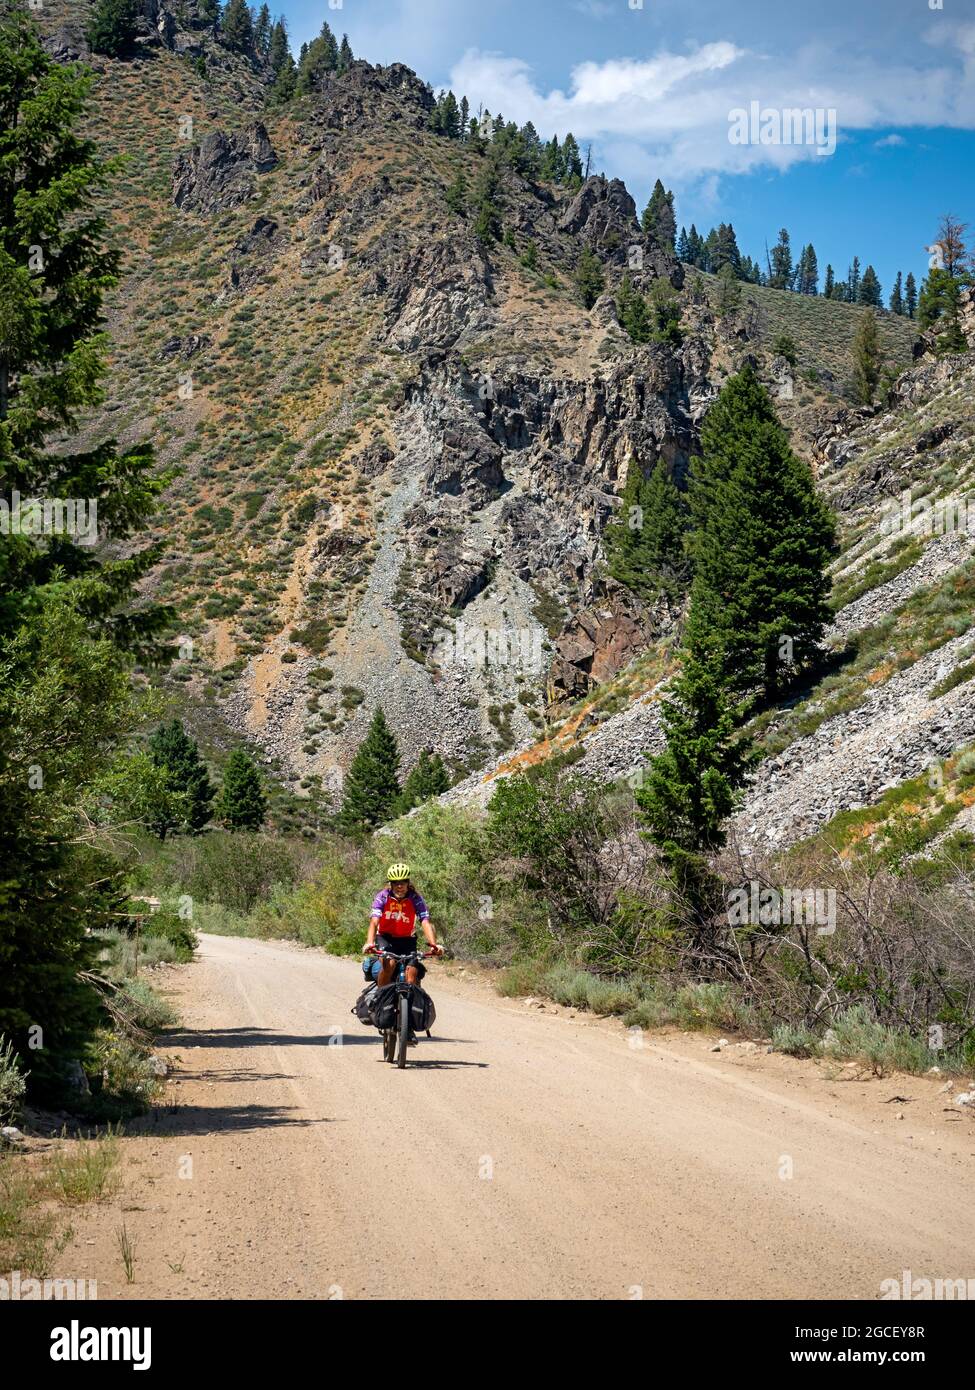 Idaho Hot Springs Mountain Bike Route High Resolution Stock Photography and  Images - Alamy